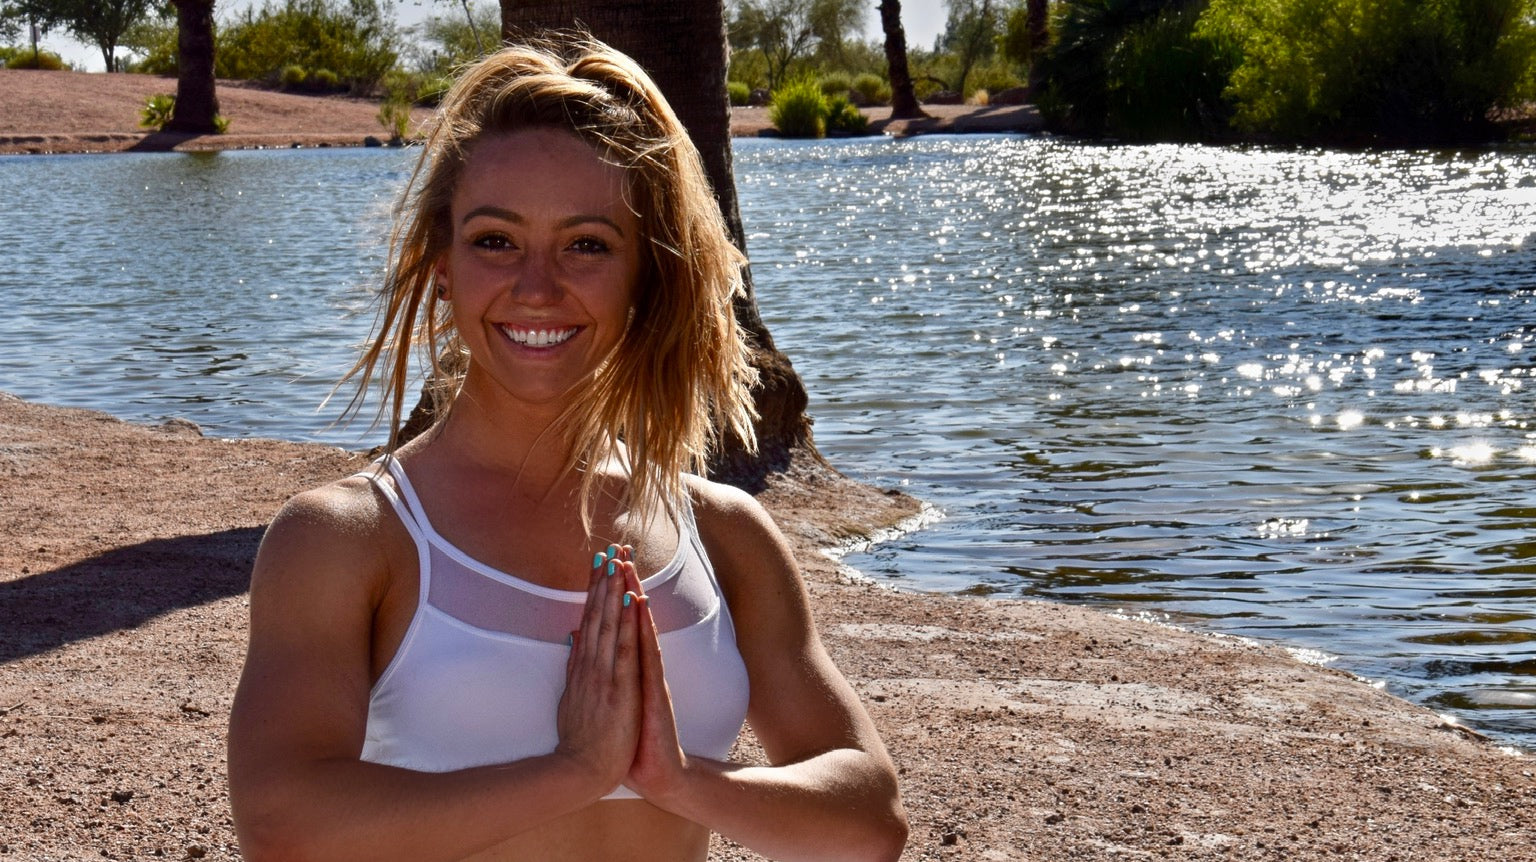 POWERGIRL Courtney reveals how she stays motivated to eat healthy